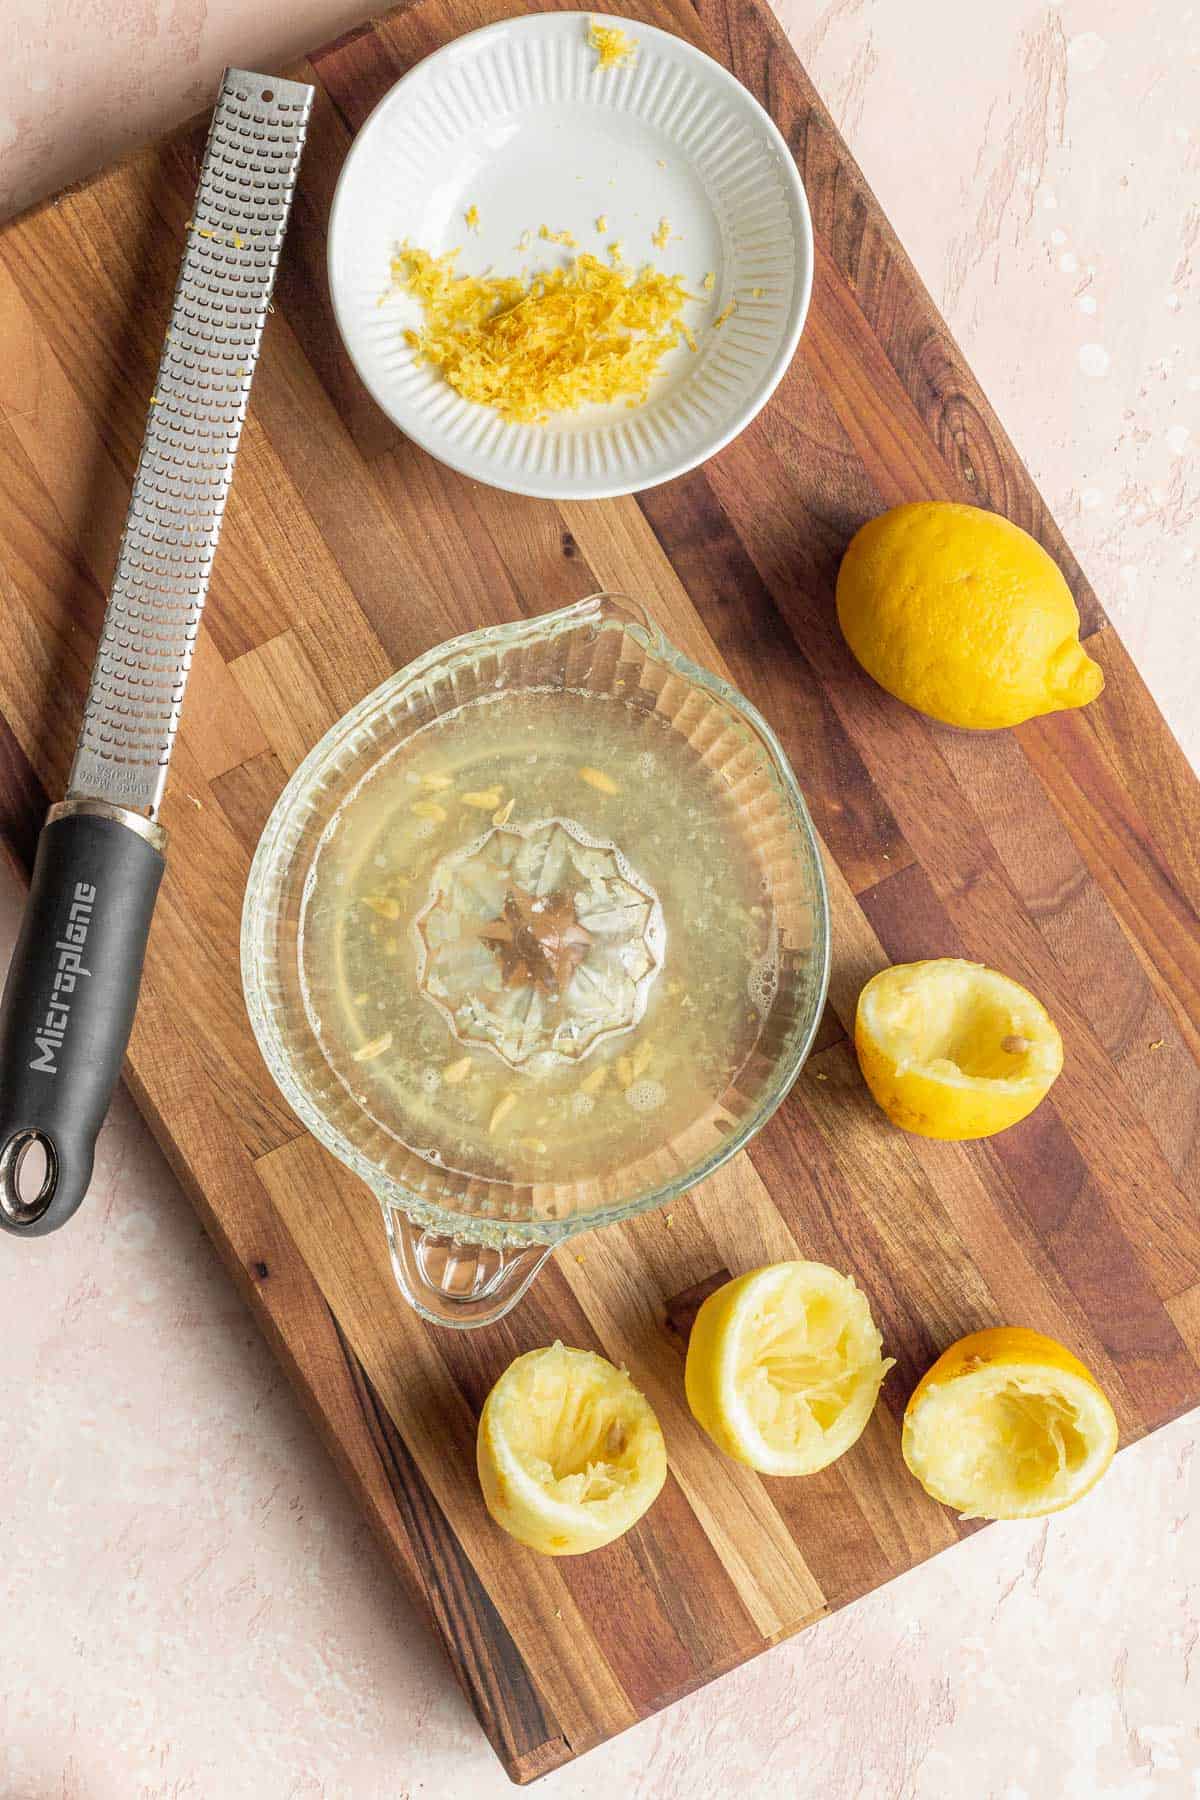 overhead shot of an old fashioned manual lemon juicer bowl filled with juice, a microplane, a plate of lemon zest, and several spent lemons on a wooden cutting board.